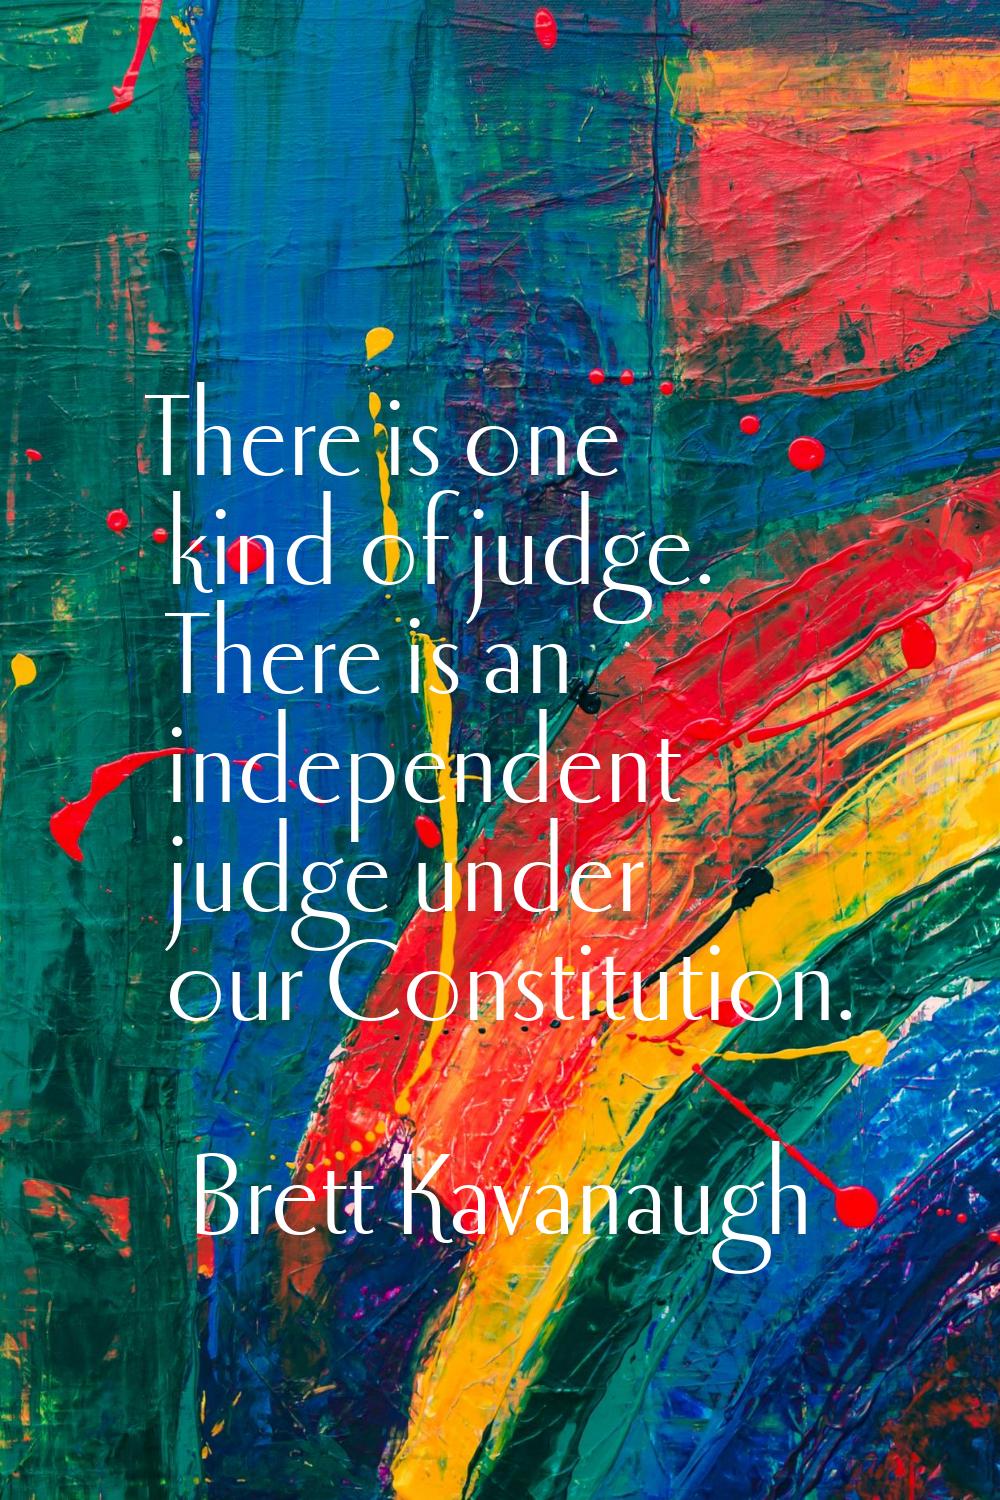 There is one kind of judge. There is an independent judge under our Constitution.